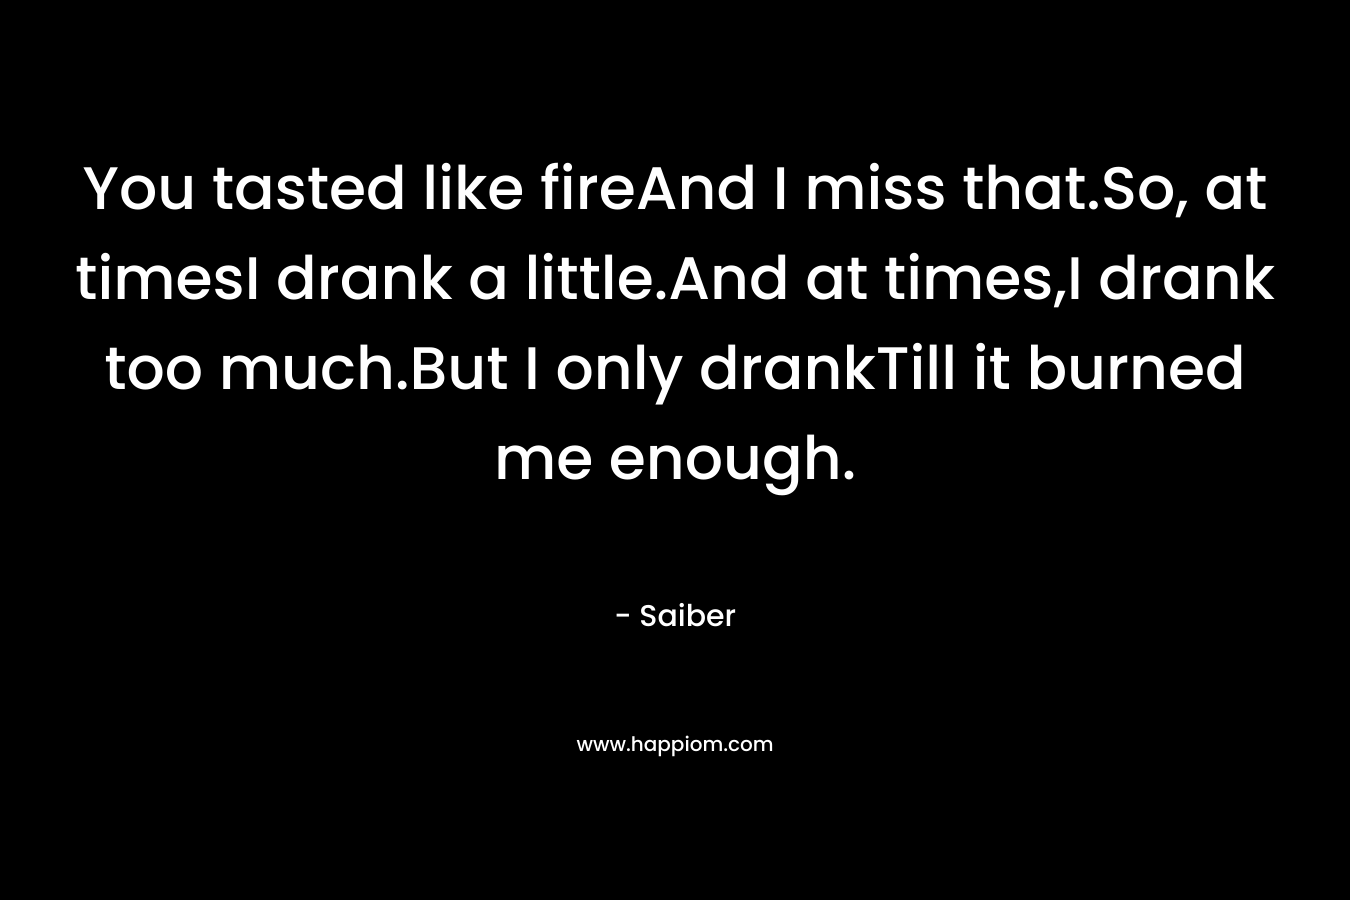 You tasted like fireAnd I miss that.So, at timesI drank a little.And at times,I drank too much.But I only drankTill it burned me enough.